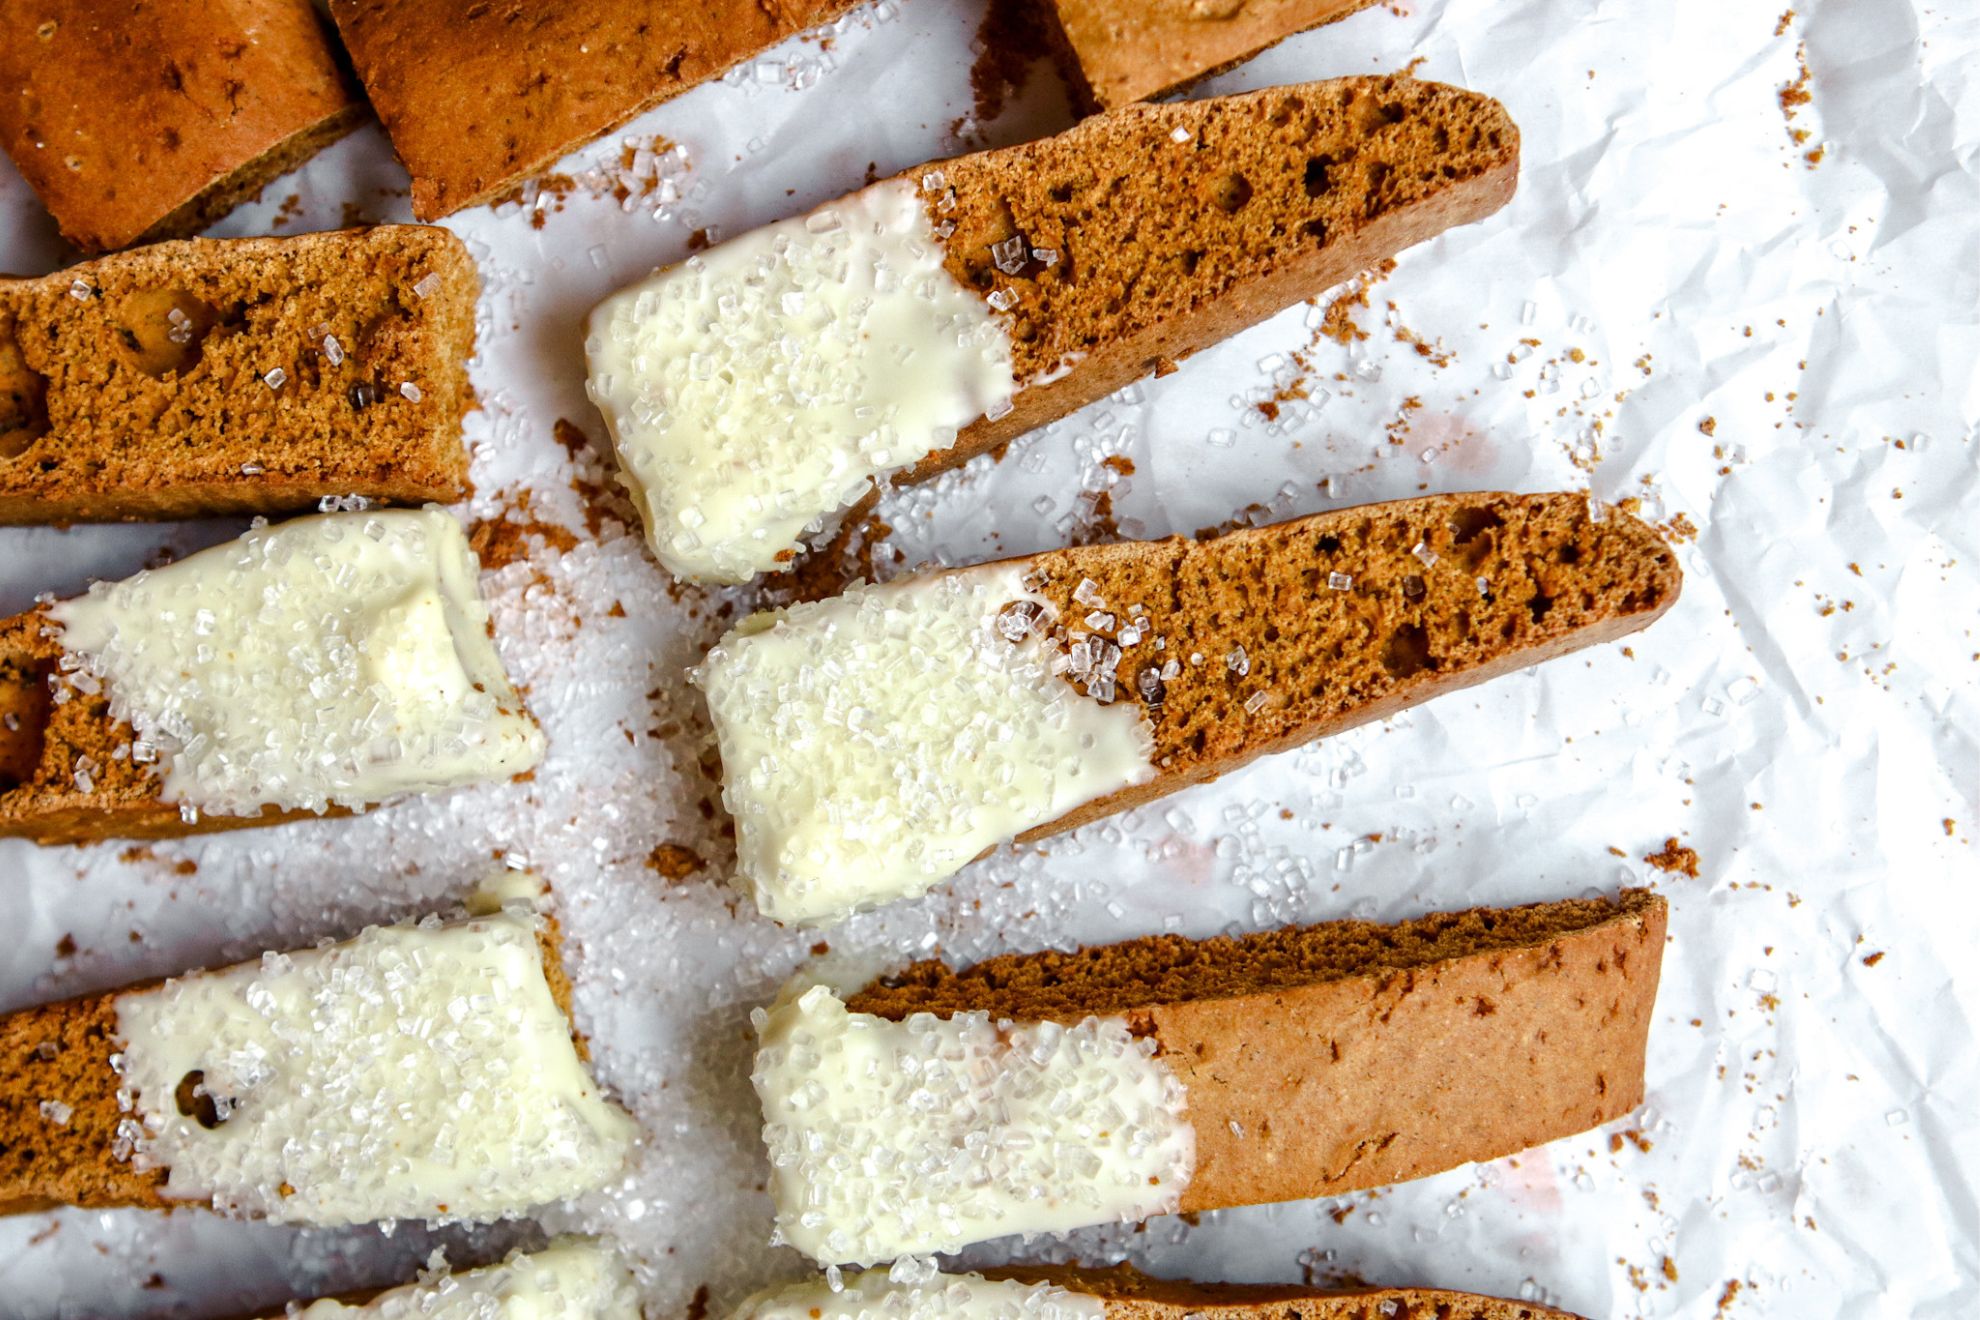 This is an overhead horizontal image of an orange-brown colored biscotti on a white piece of parchment paper. The biscotti is dipped in white chocolate and sprinkled with a clear/white sugar sprinkles.